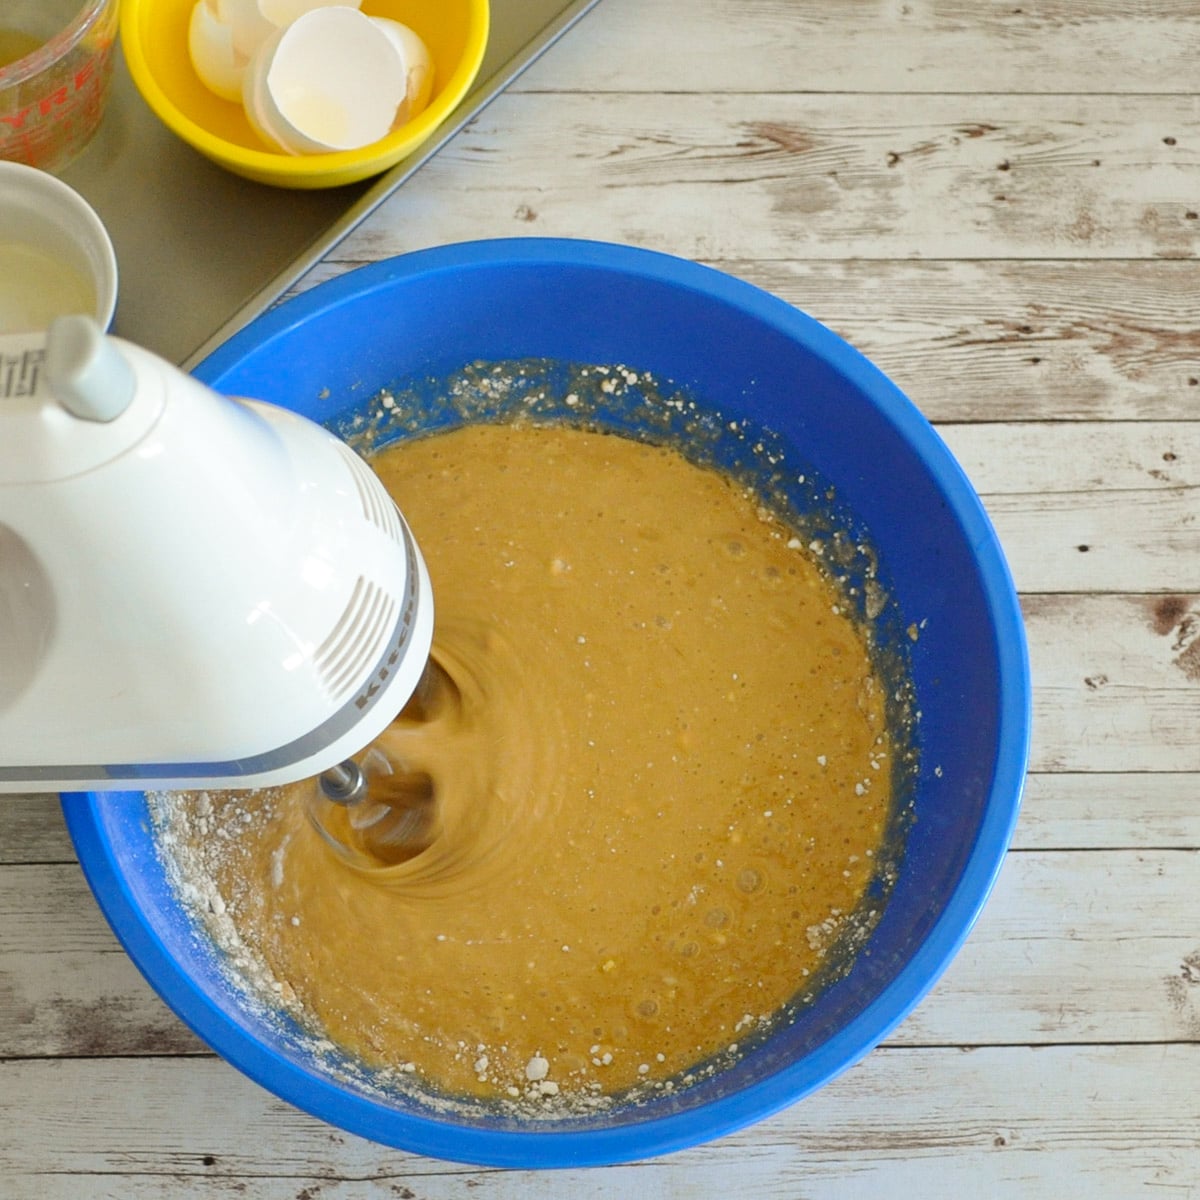 white cake mix batter be blended with coffee instead of water